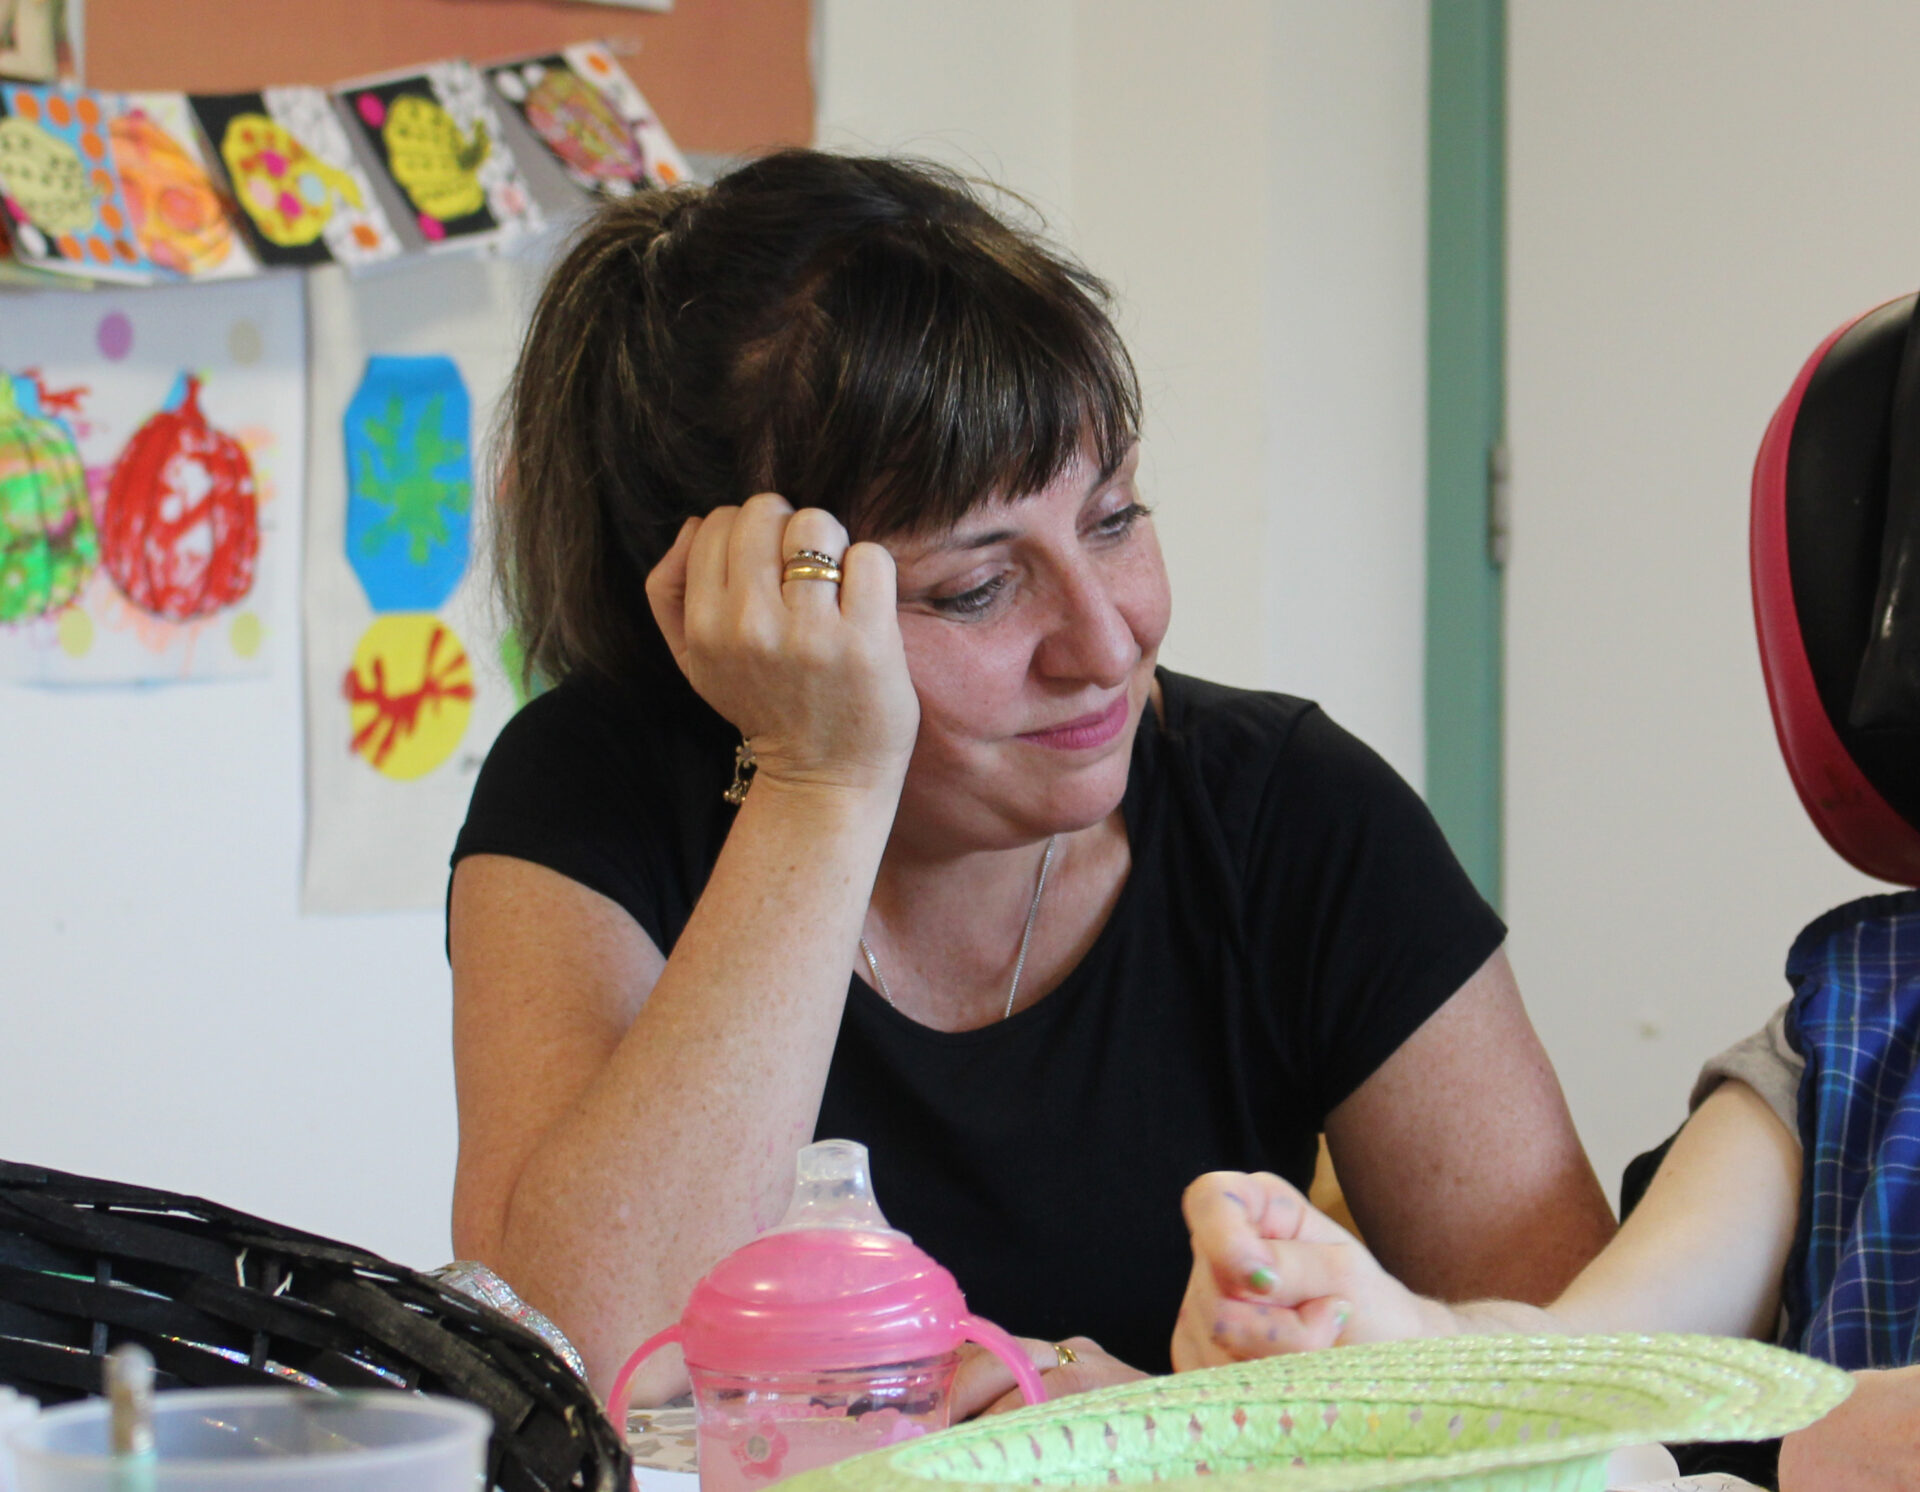 A white woman with dark hair and wearing a black t-shirt sits in an art room with her hand on her head. She is watching a client make art.